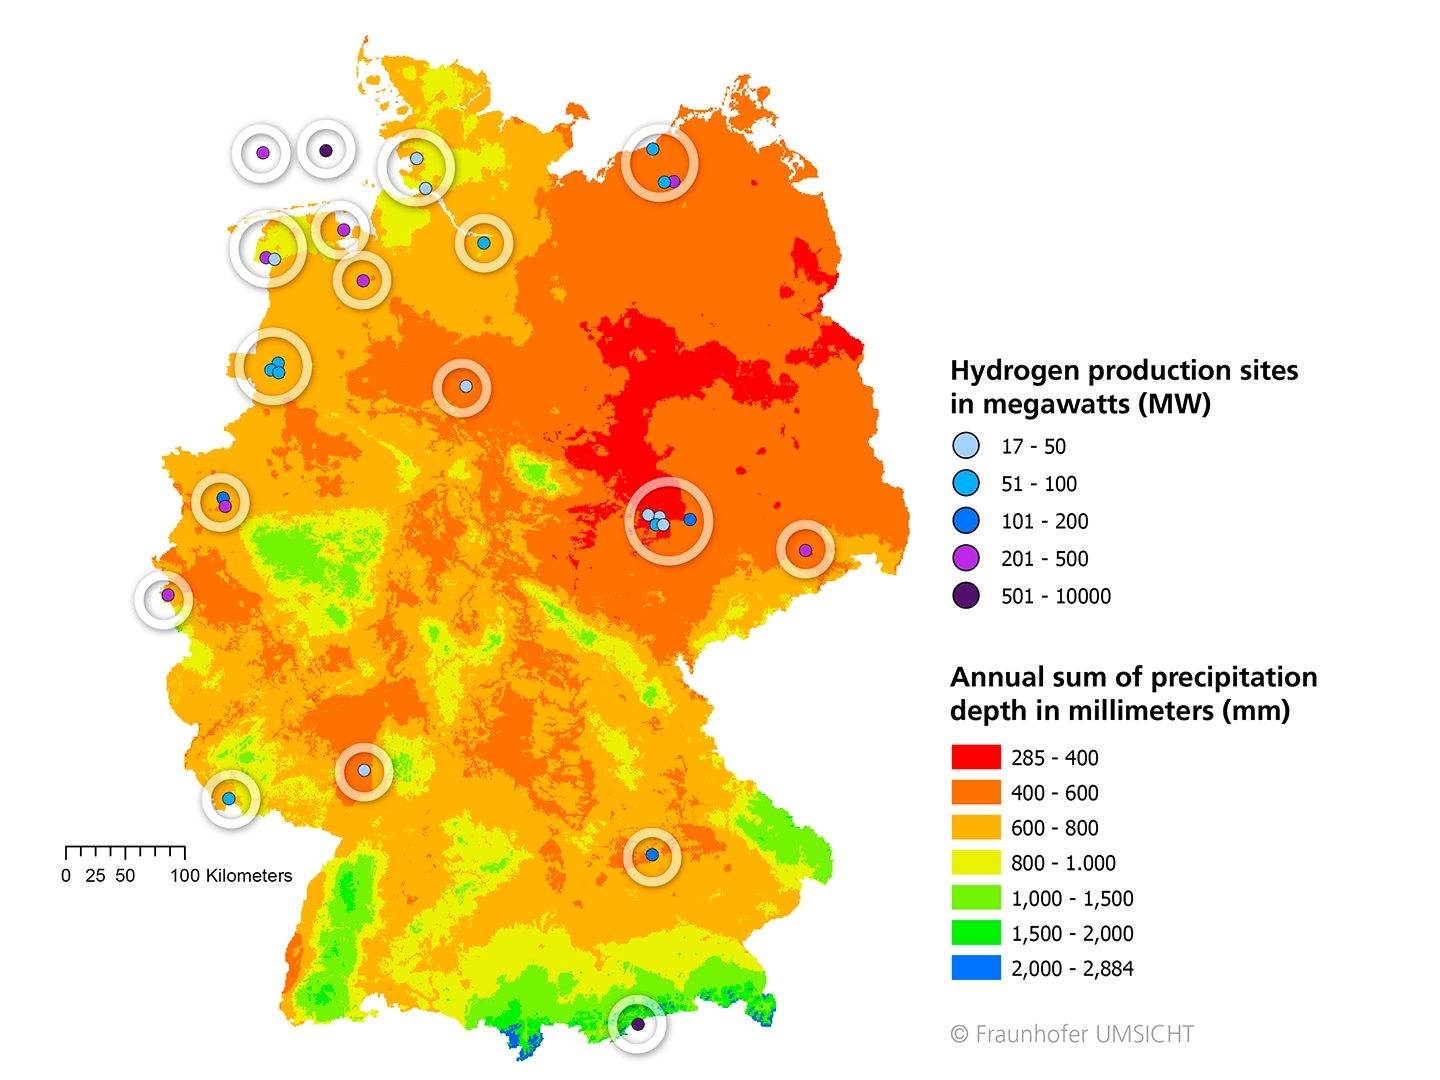 Hydrogen production sites in Germany and precipitation totals